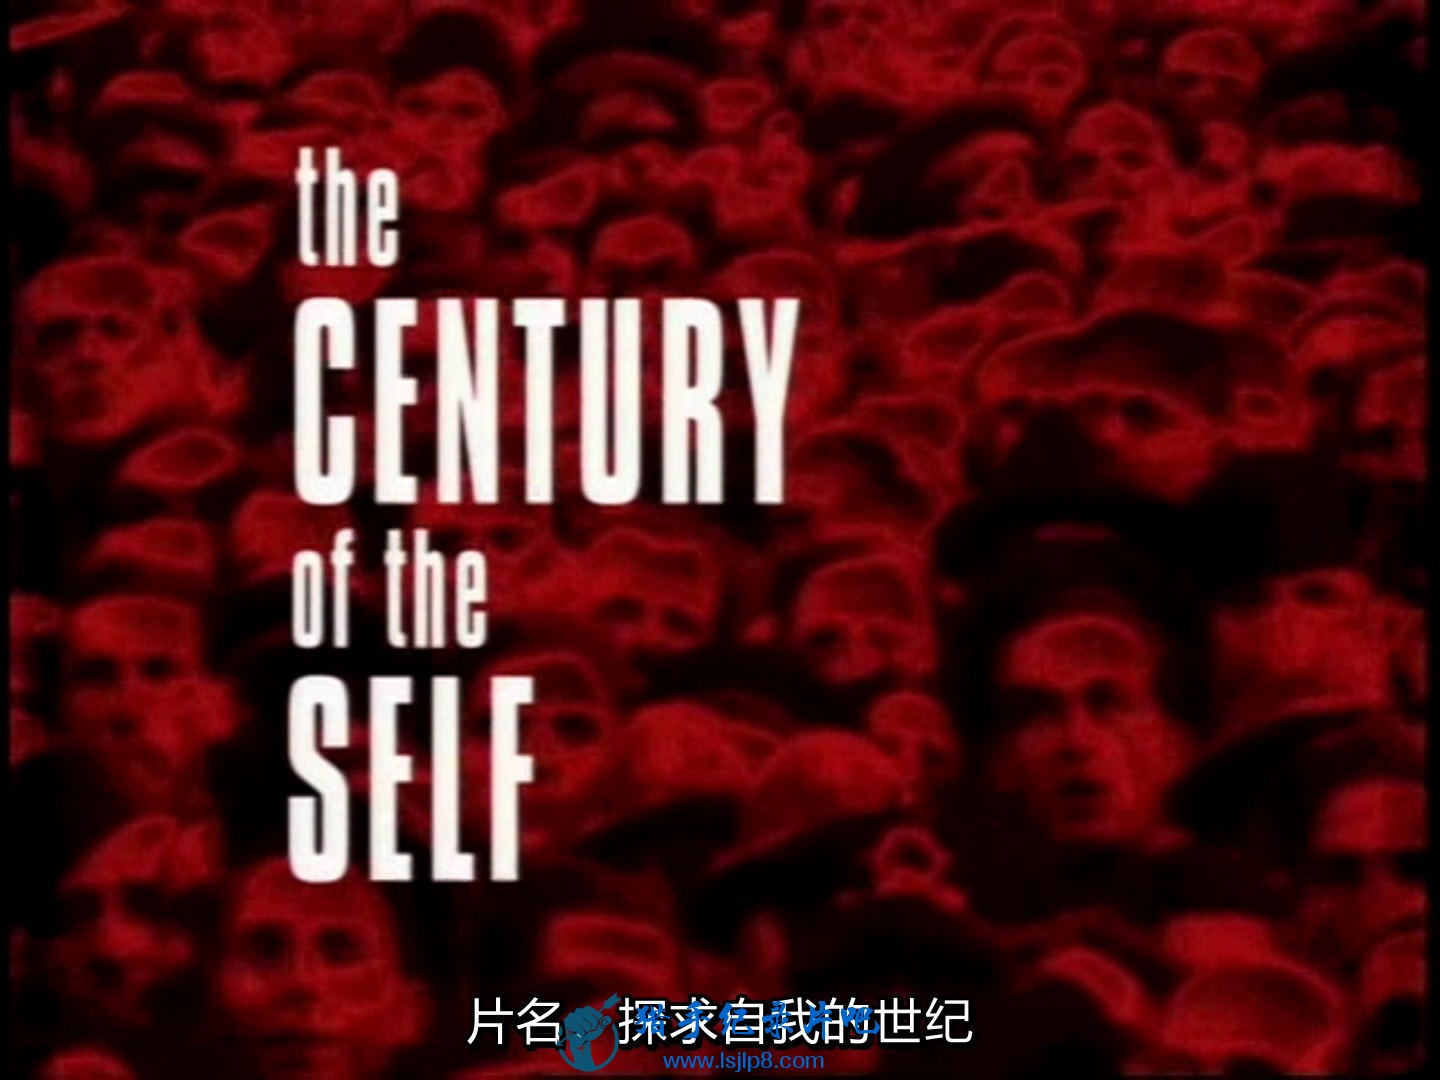 BBC.The.Century.of.the.Self.1of4.Happiness.Machines.DVDRip.x264.AAC.MVGroup.org..jpg